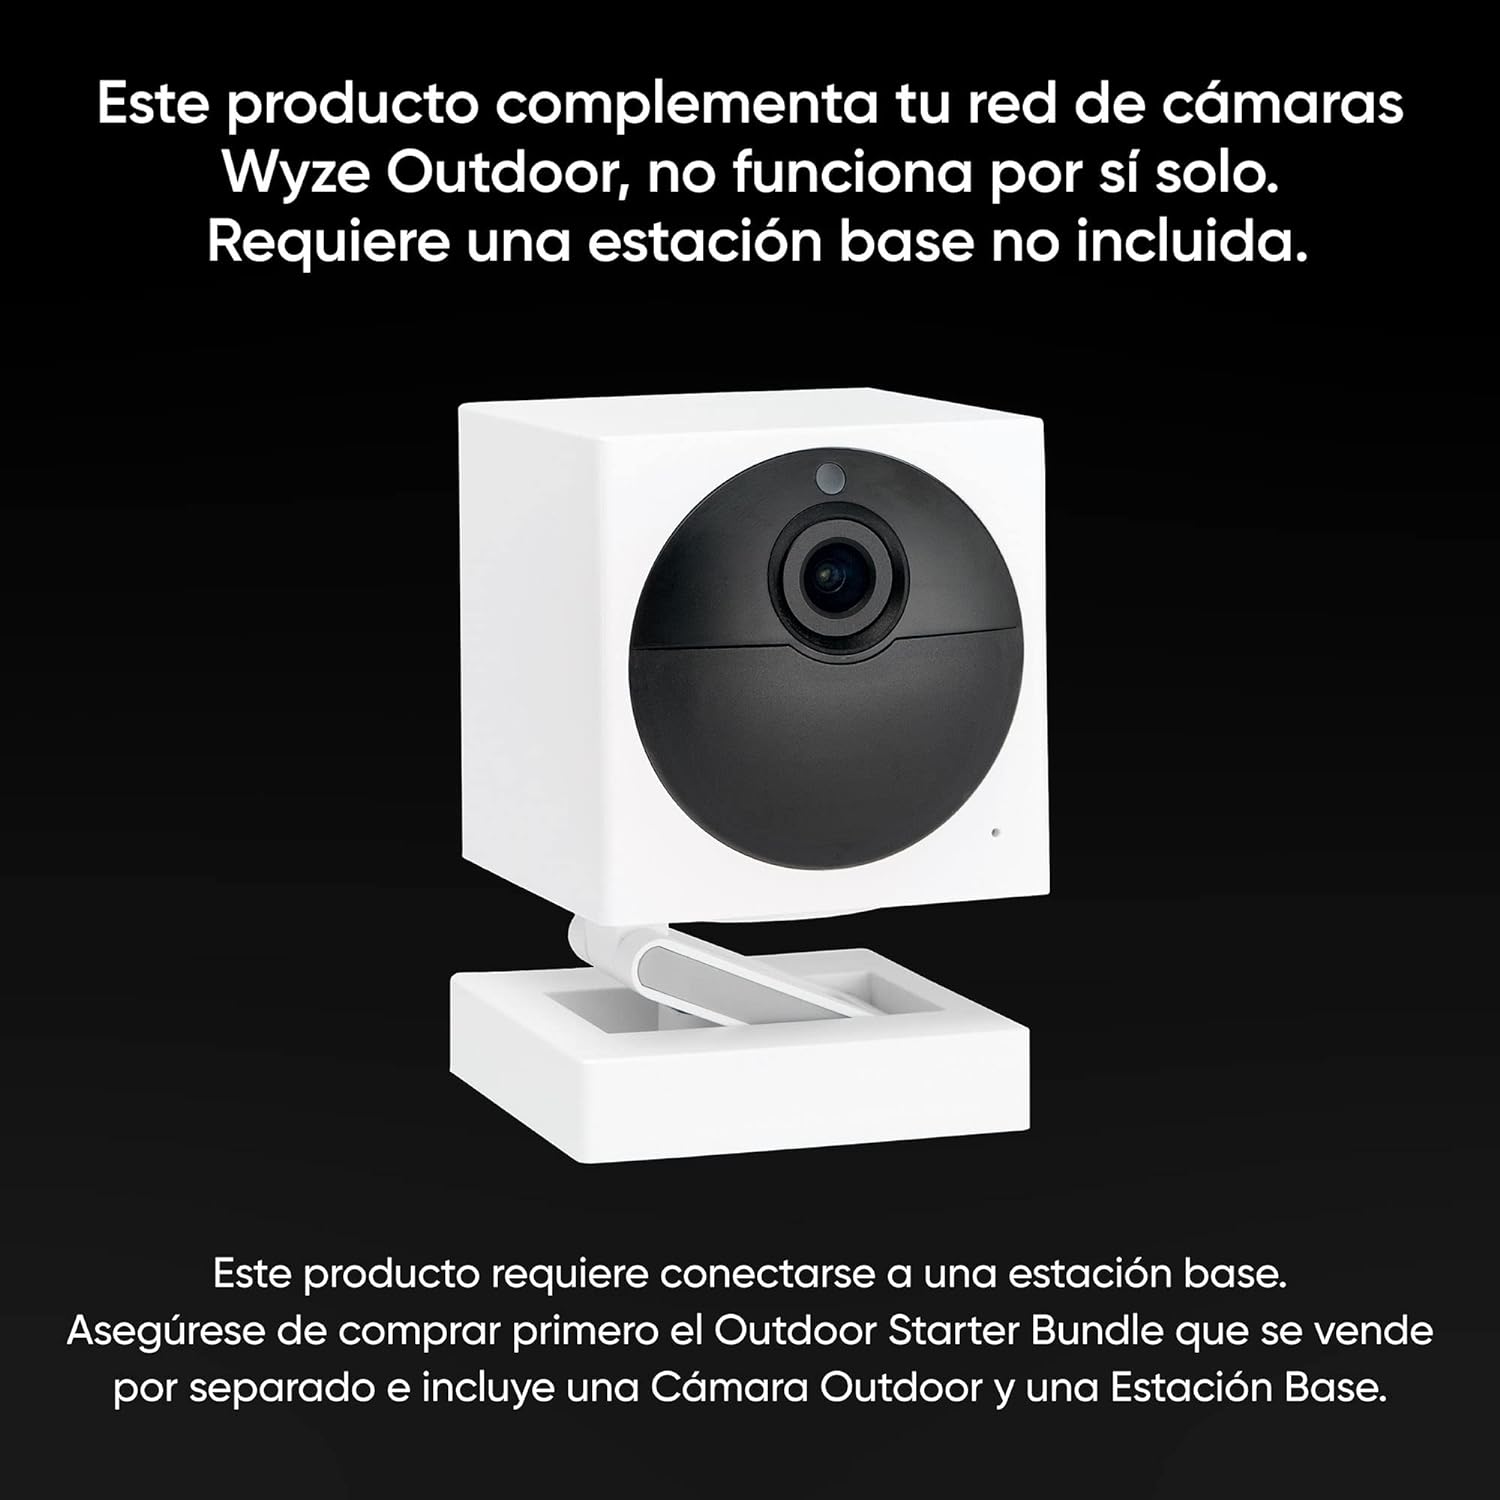 Wyze Cam Outdoor Add-on Camera, 1080p HD Indoor/Outdoor Wire-Free Smart Home Camera with Night Vision, 2-Way Audio, Compatible with Alexa & Google Assistant (base station required)